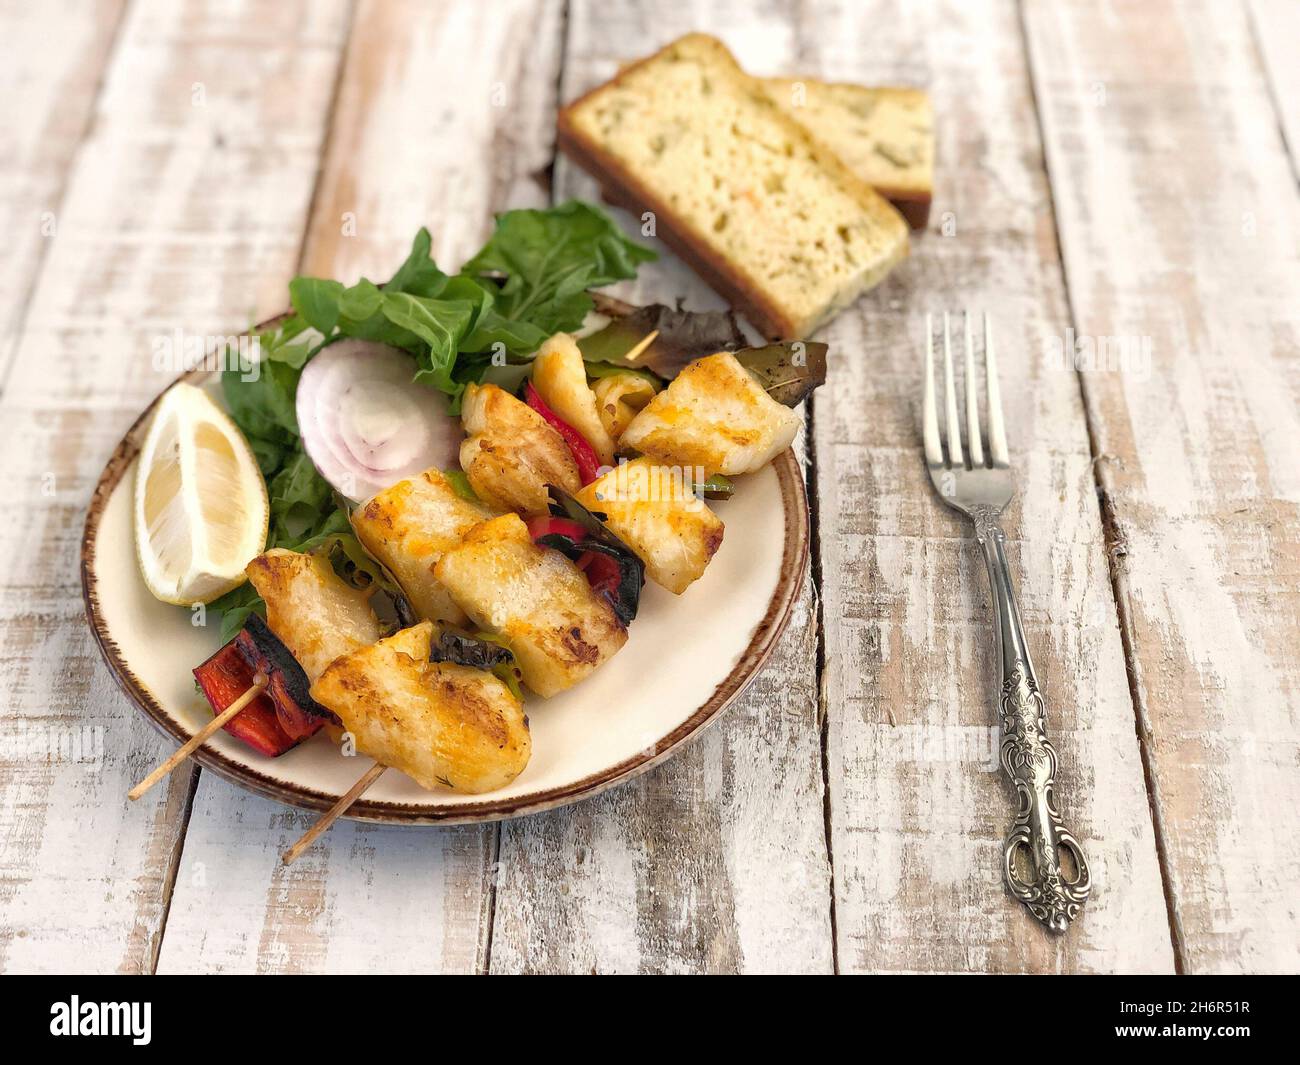 Skewed sole fish served with salad and sliced corn bread on table Stock Photo